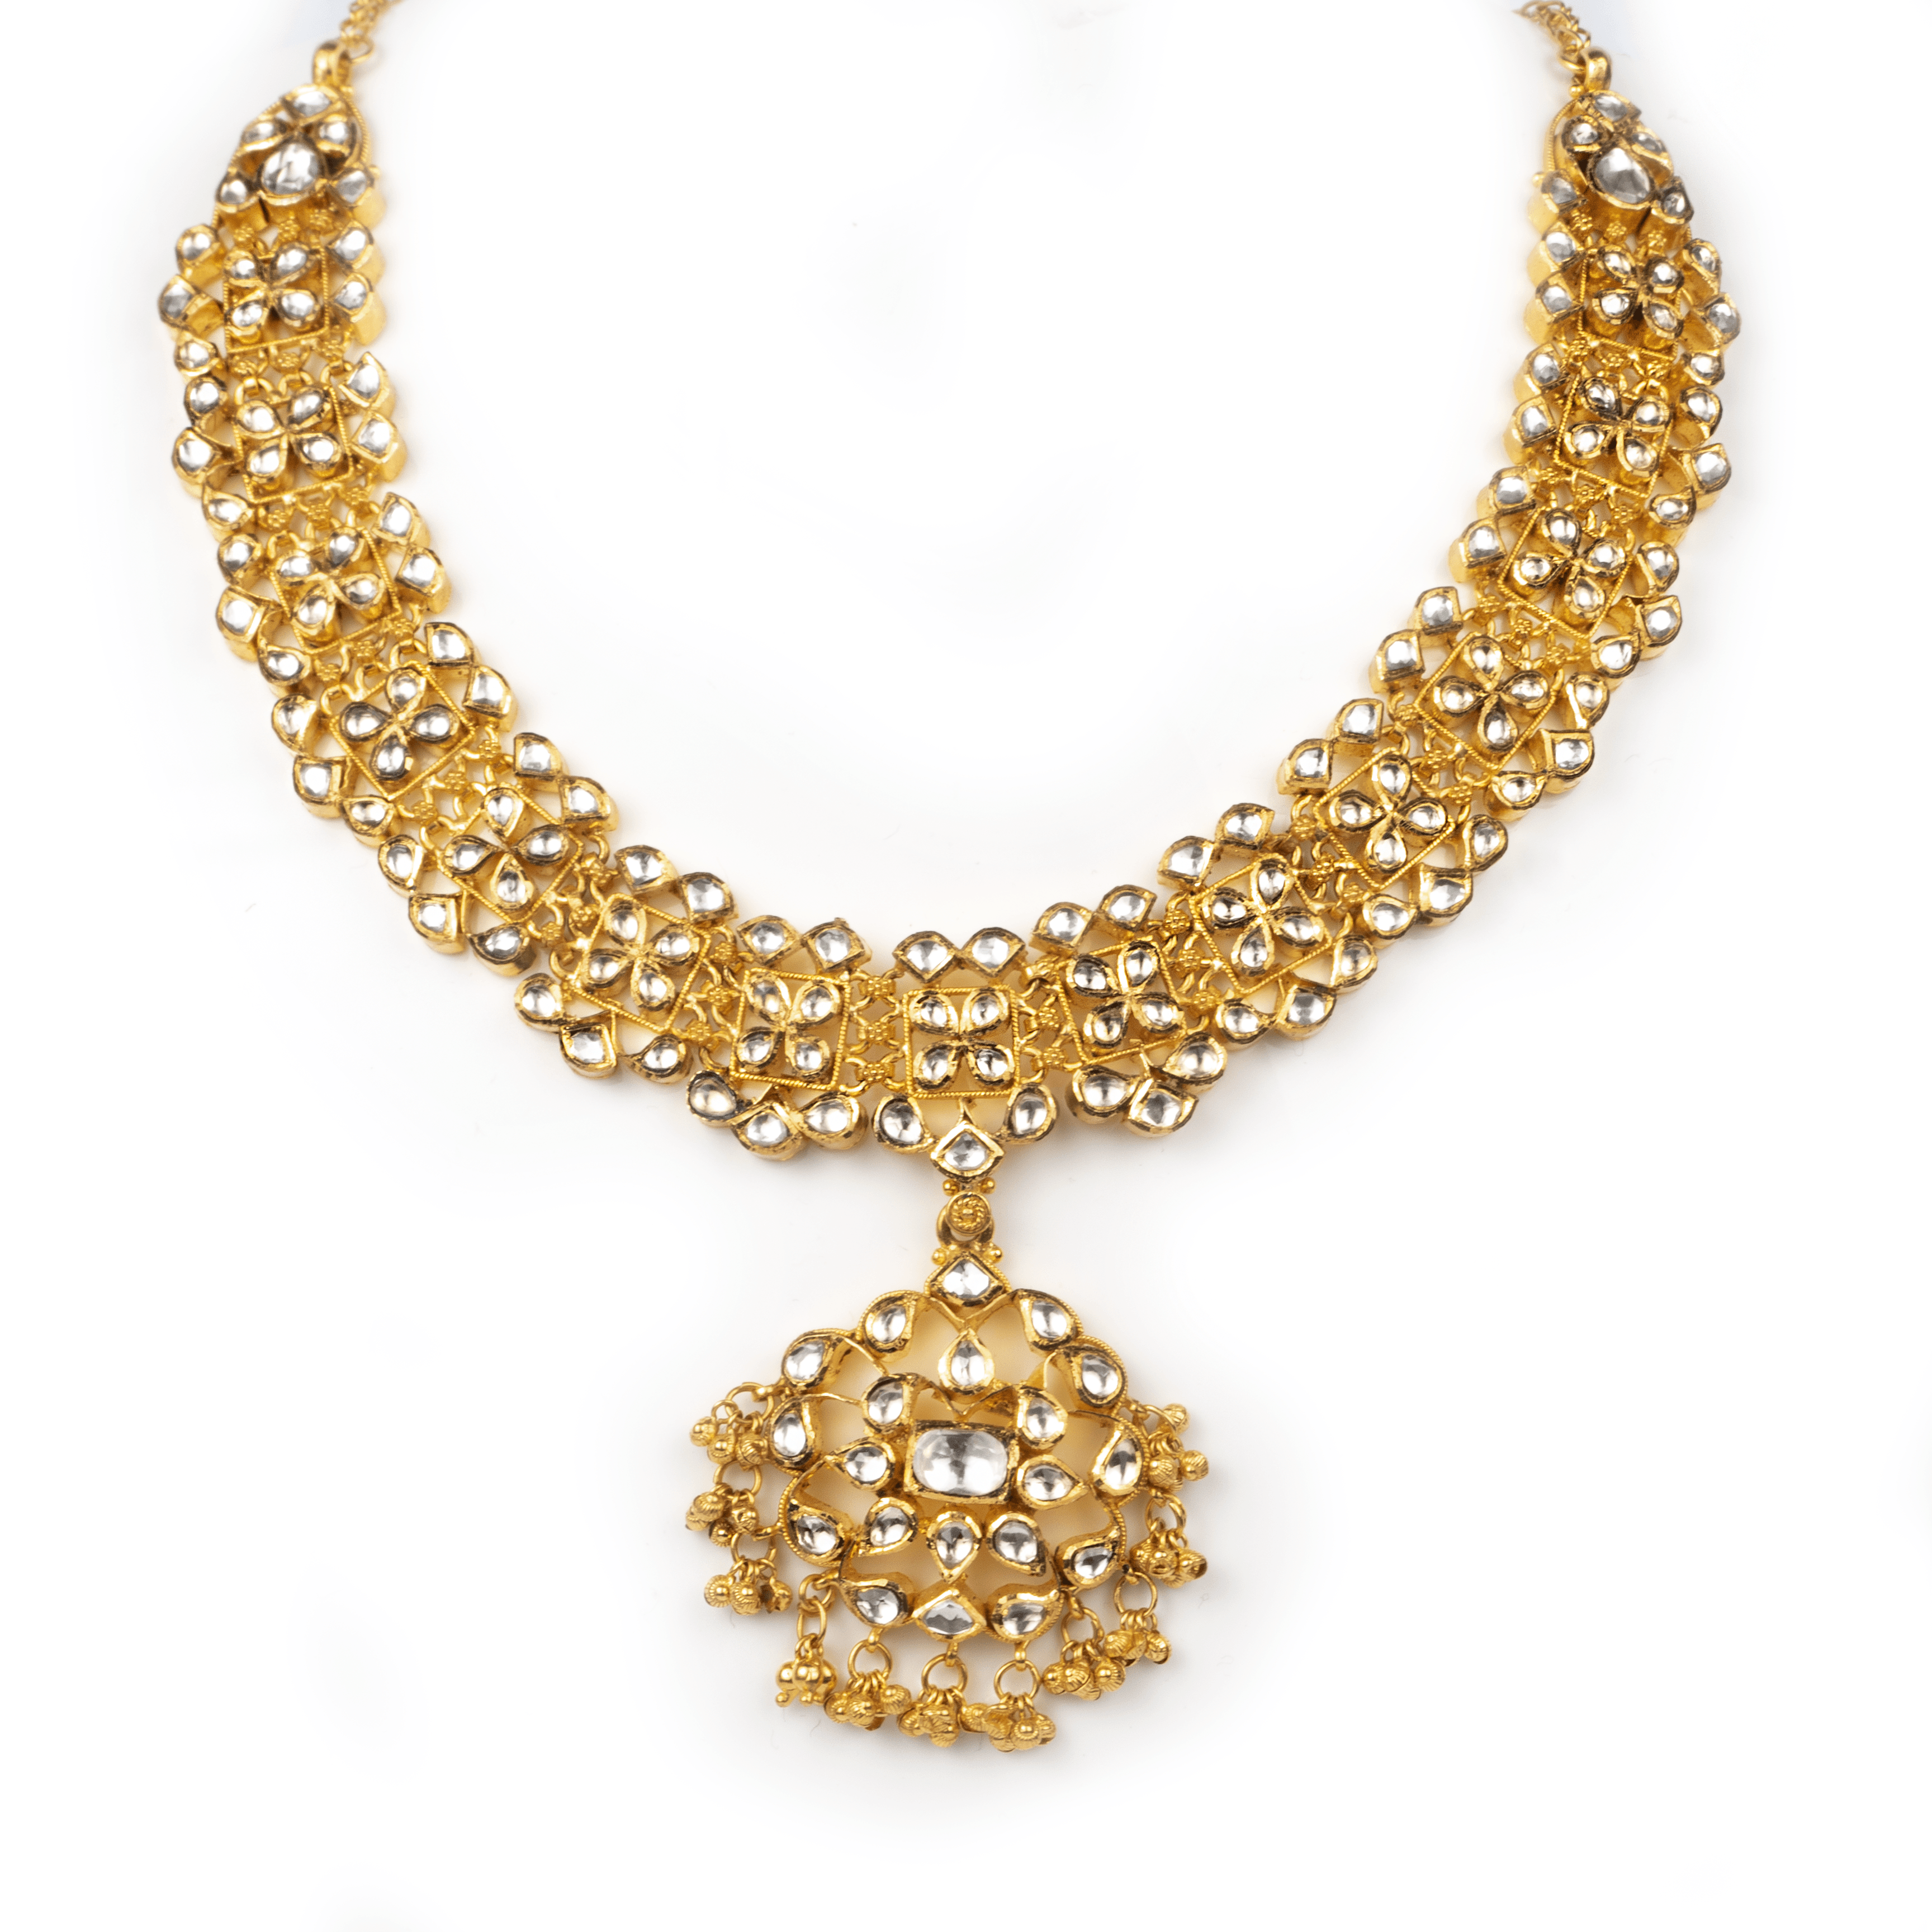 22ct Gold Antiquated Look Necklace and Earrings set with Cubic Zirconia stones (120.7g) N&E-5921 - Minar Jewellers